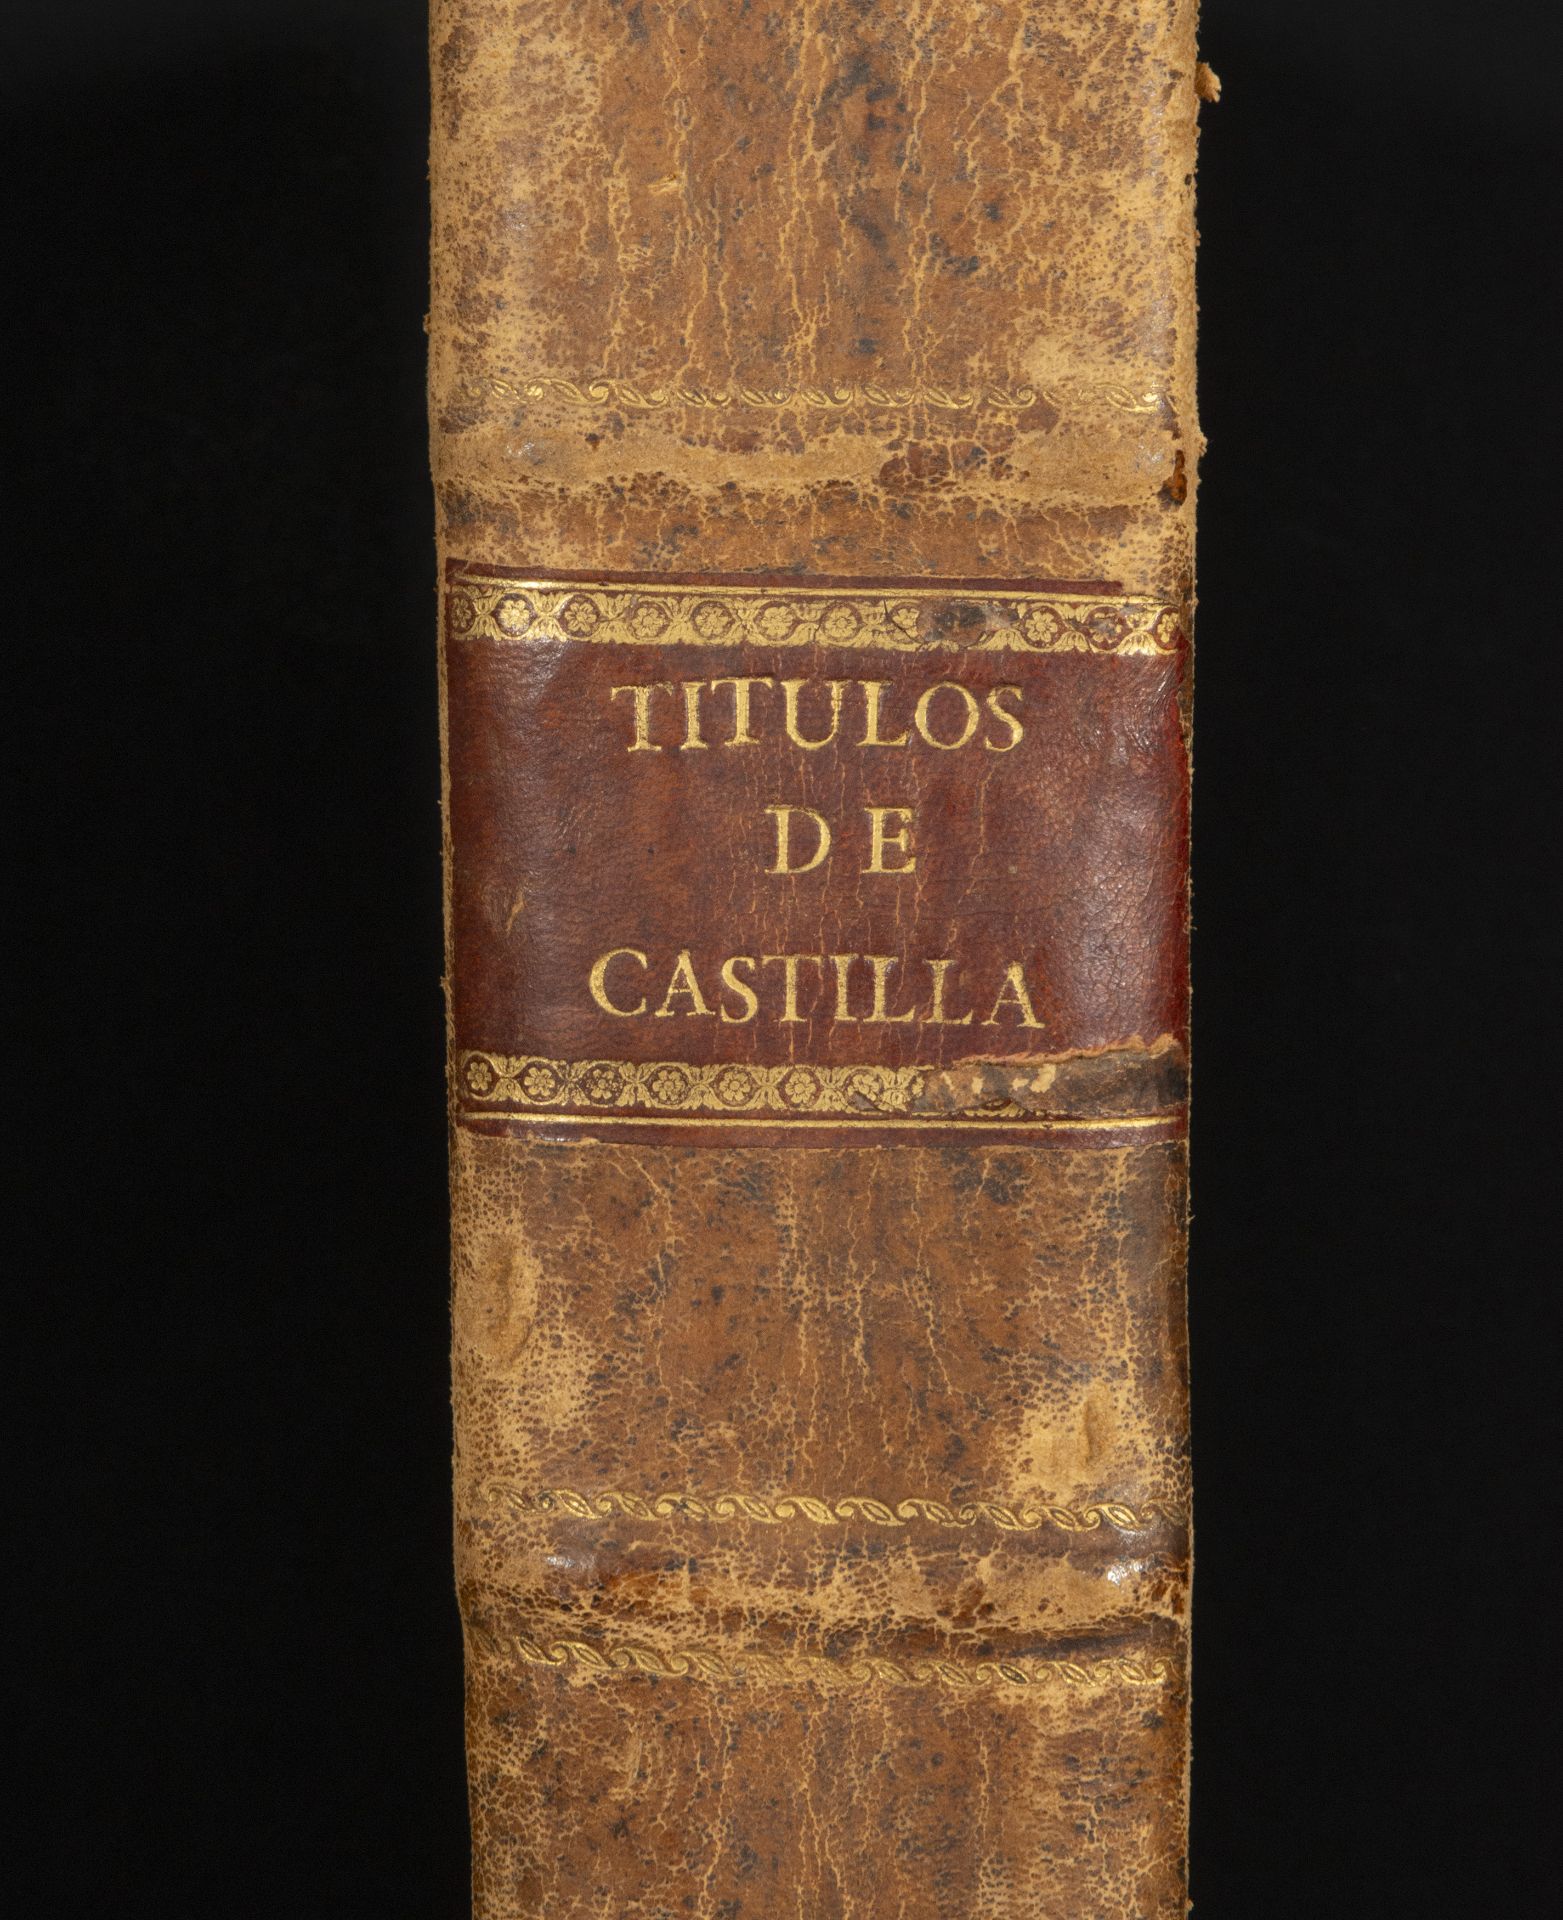 Rare Compendium Book from the 18th century with all the Nobility shields of Castile, 18th century - Image 2 of 9